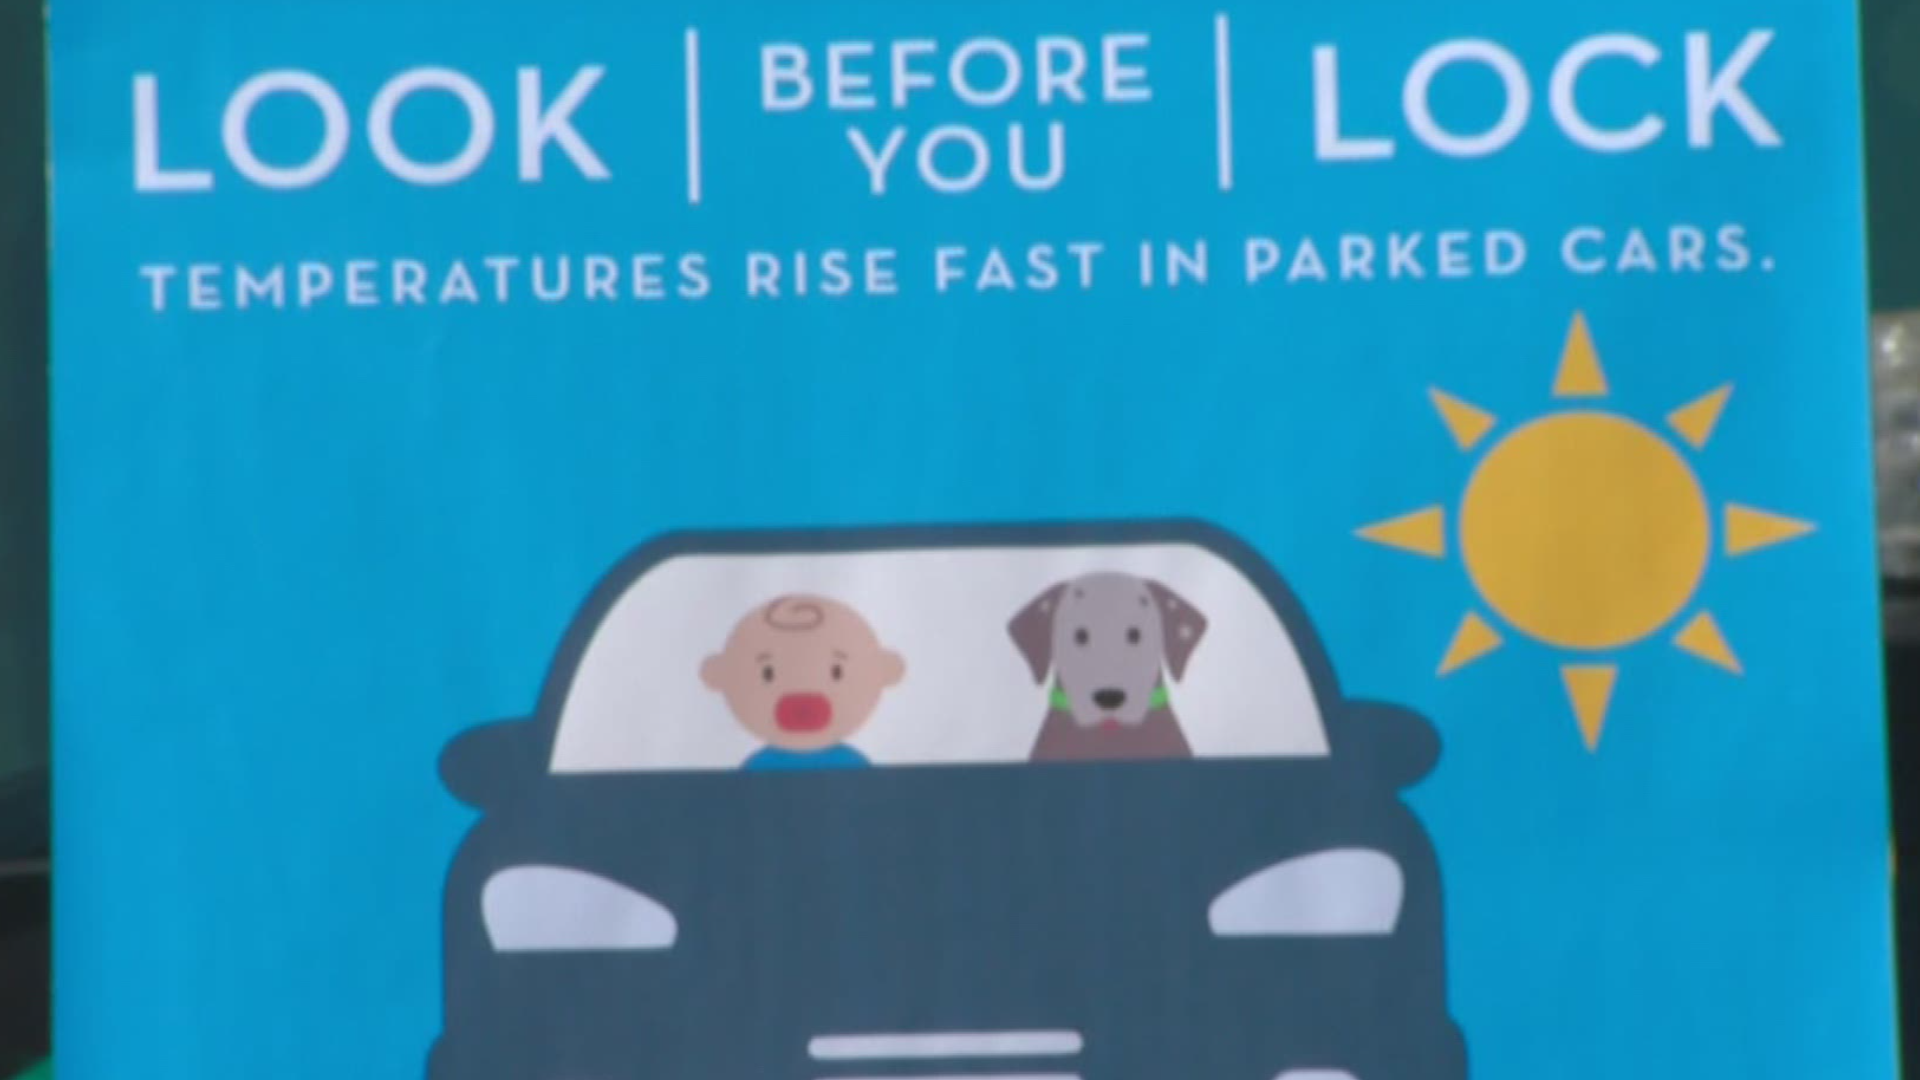 The campaign aims to keep kids, pets and seniors safe in a car.